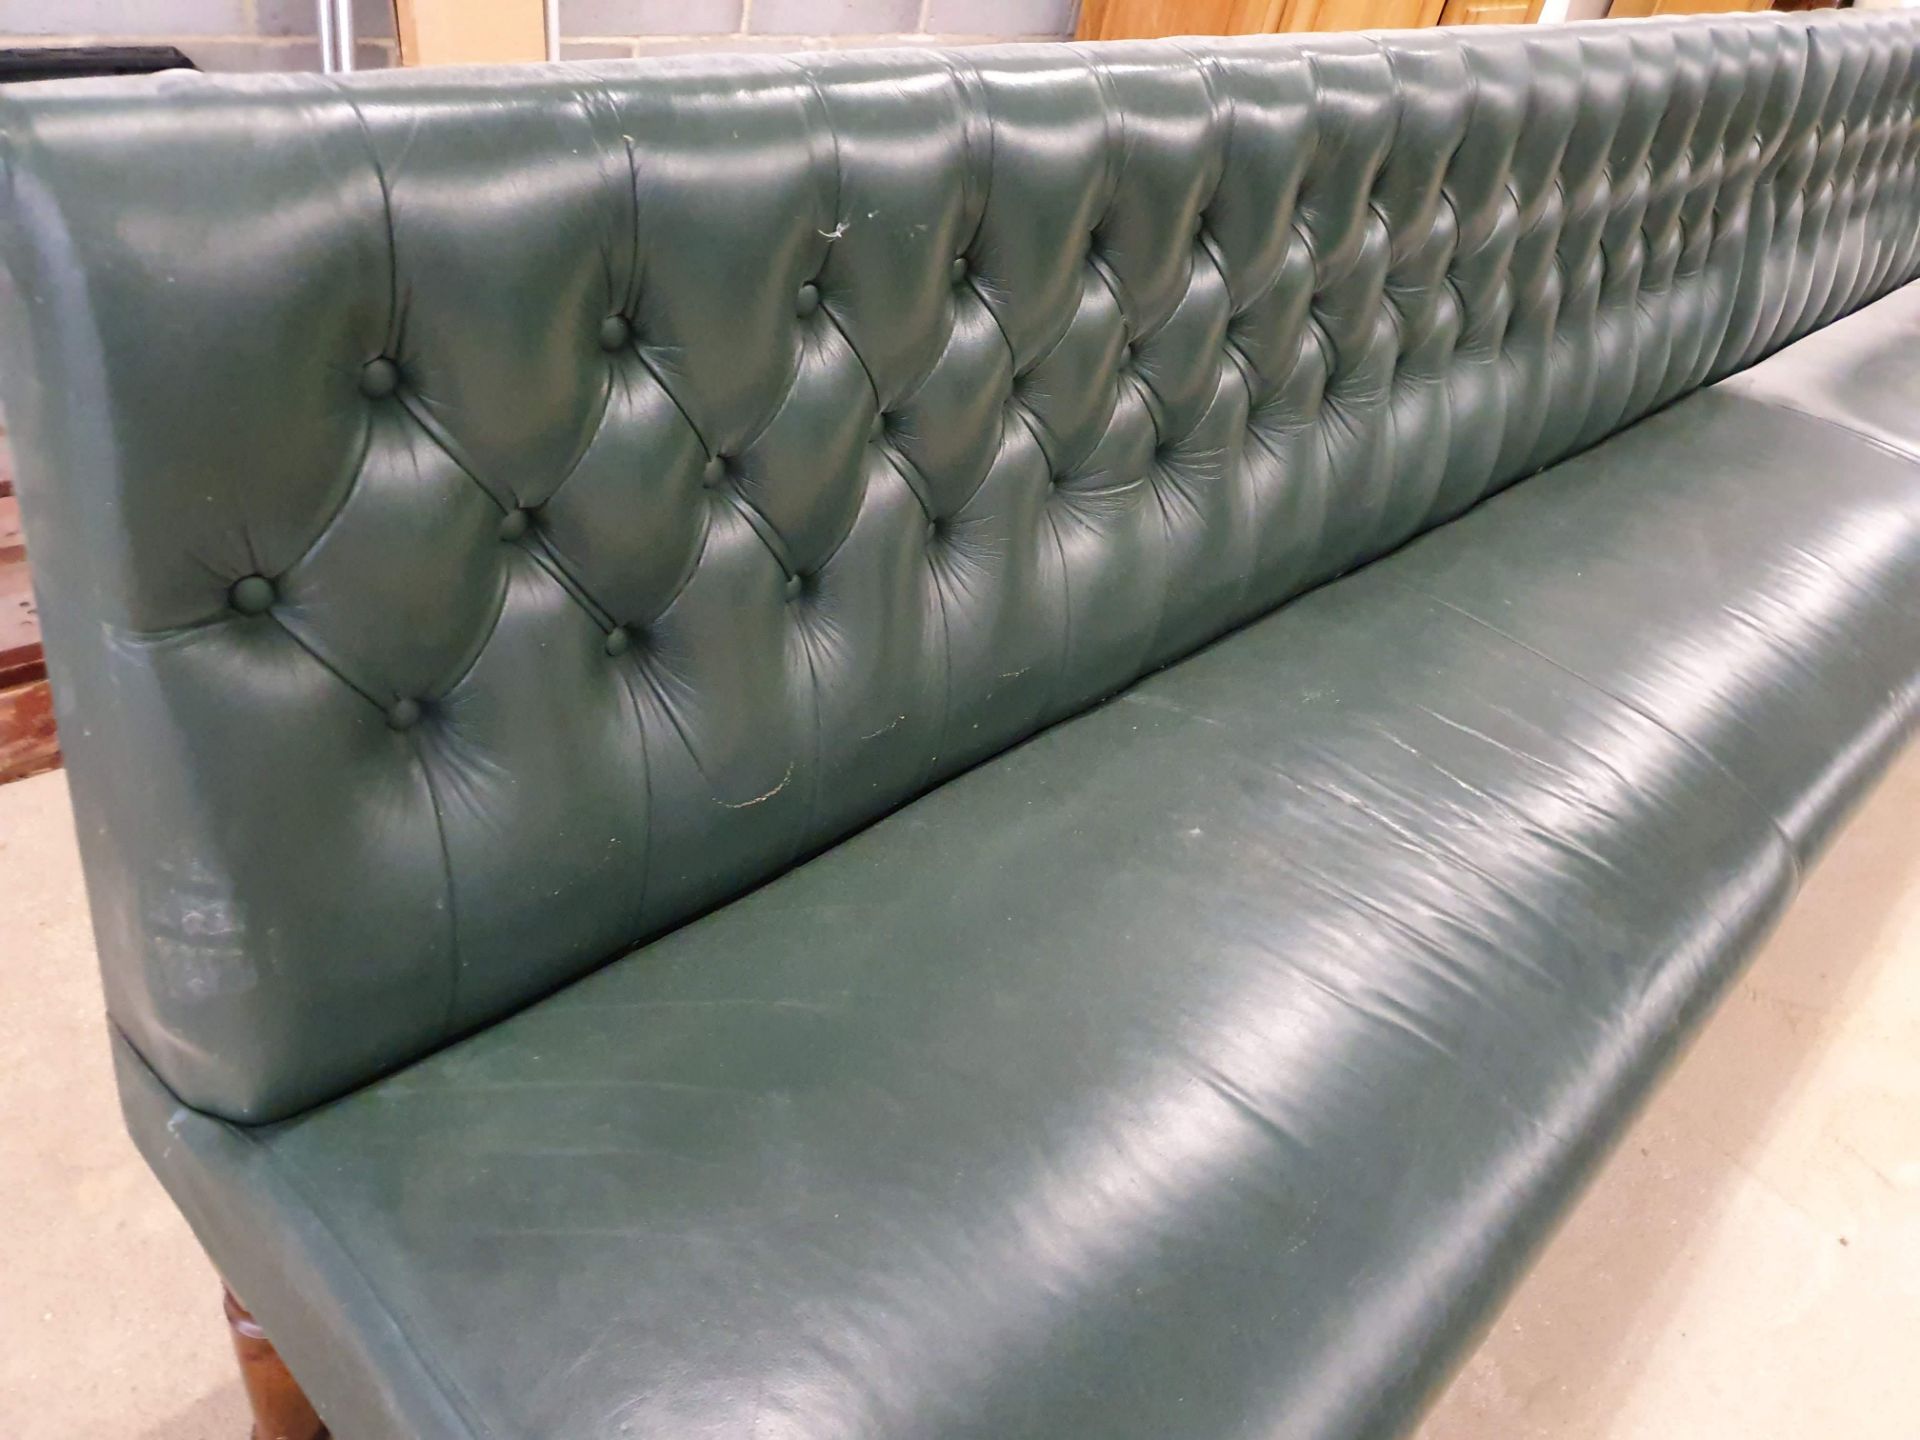 1 x Restaurant Seating Bench Upholstery in Green With Studded Back and Oak Turned Legs - H91 - Image 7 of 10